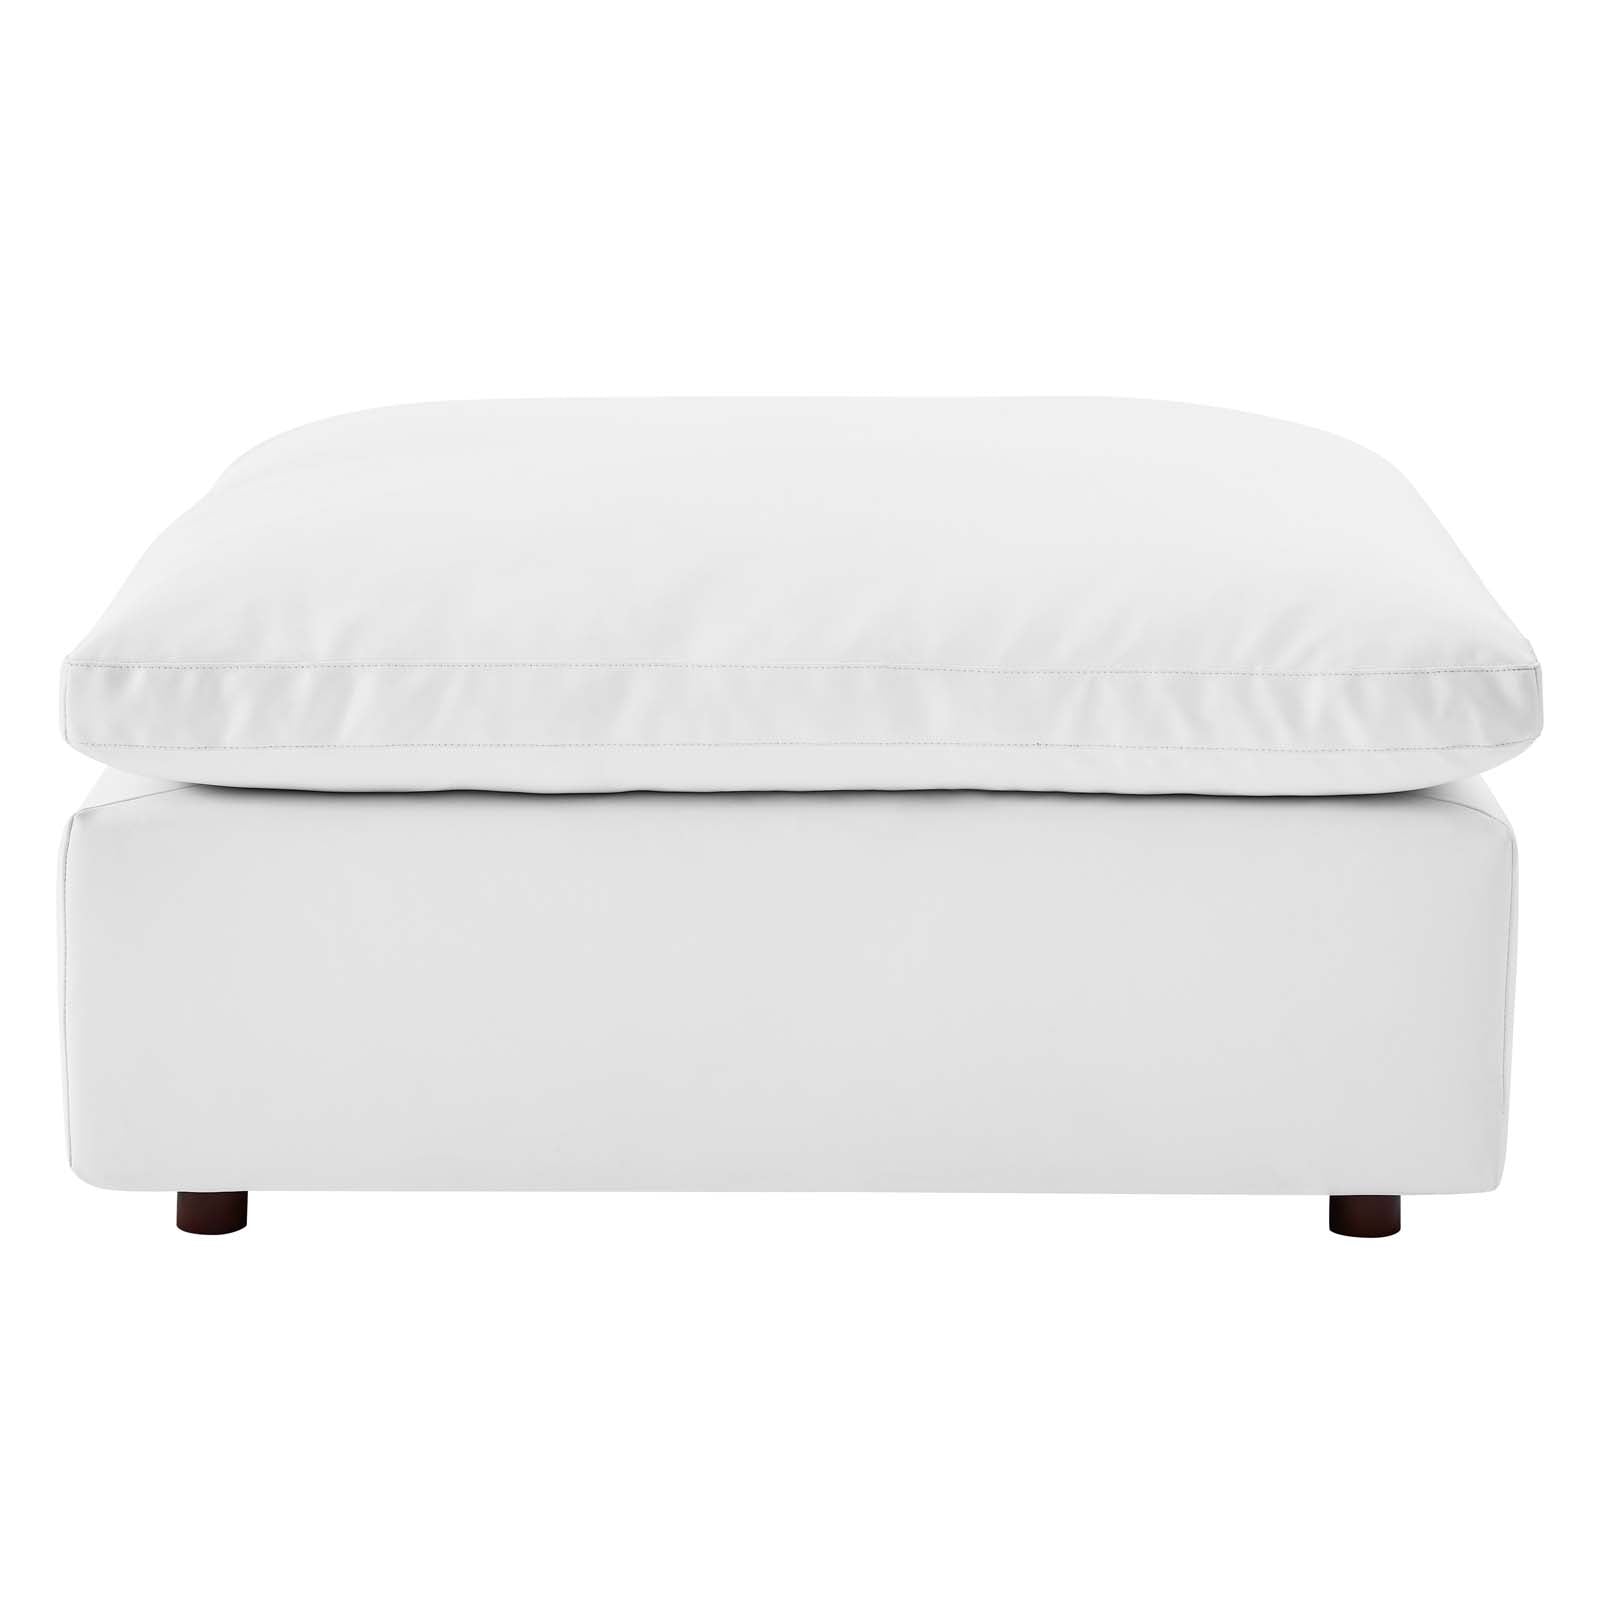 Modway Ottomans & Stools - Commix Down Filled Overstuffed Vegan Leather Ottoman White